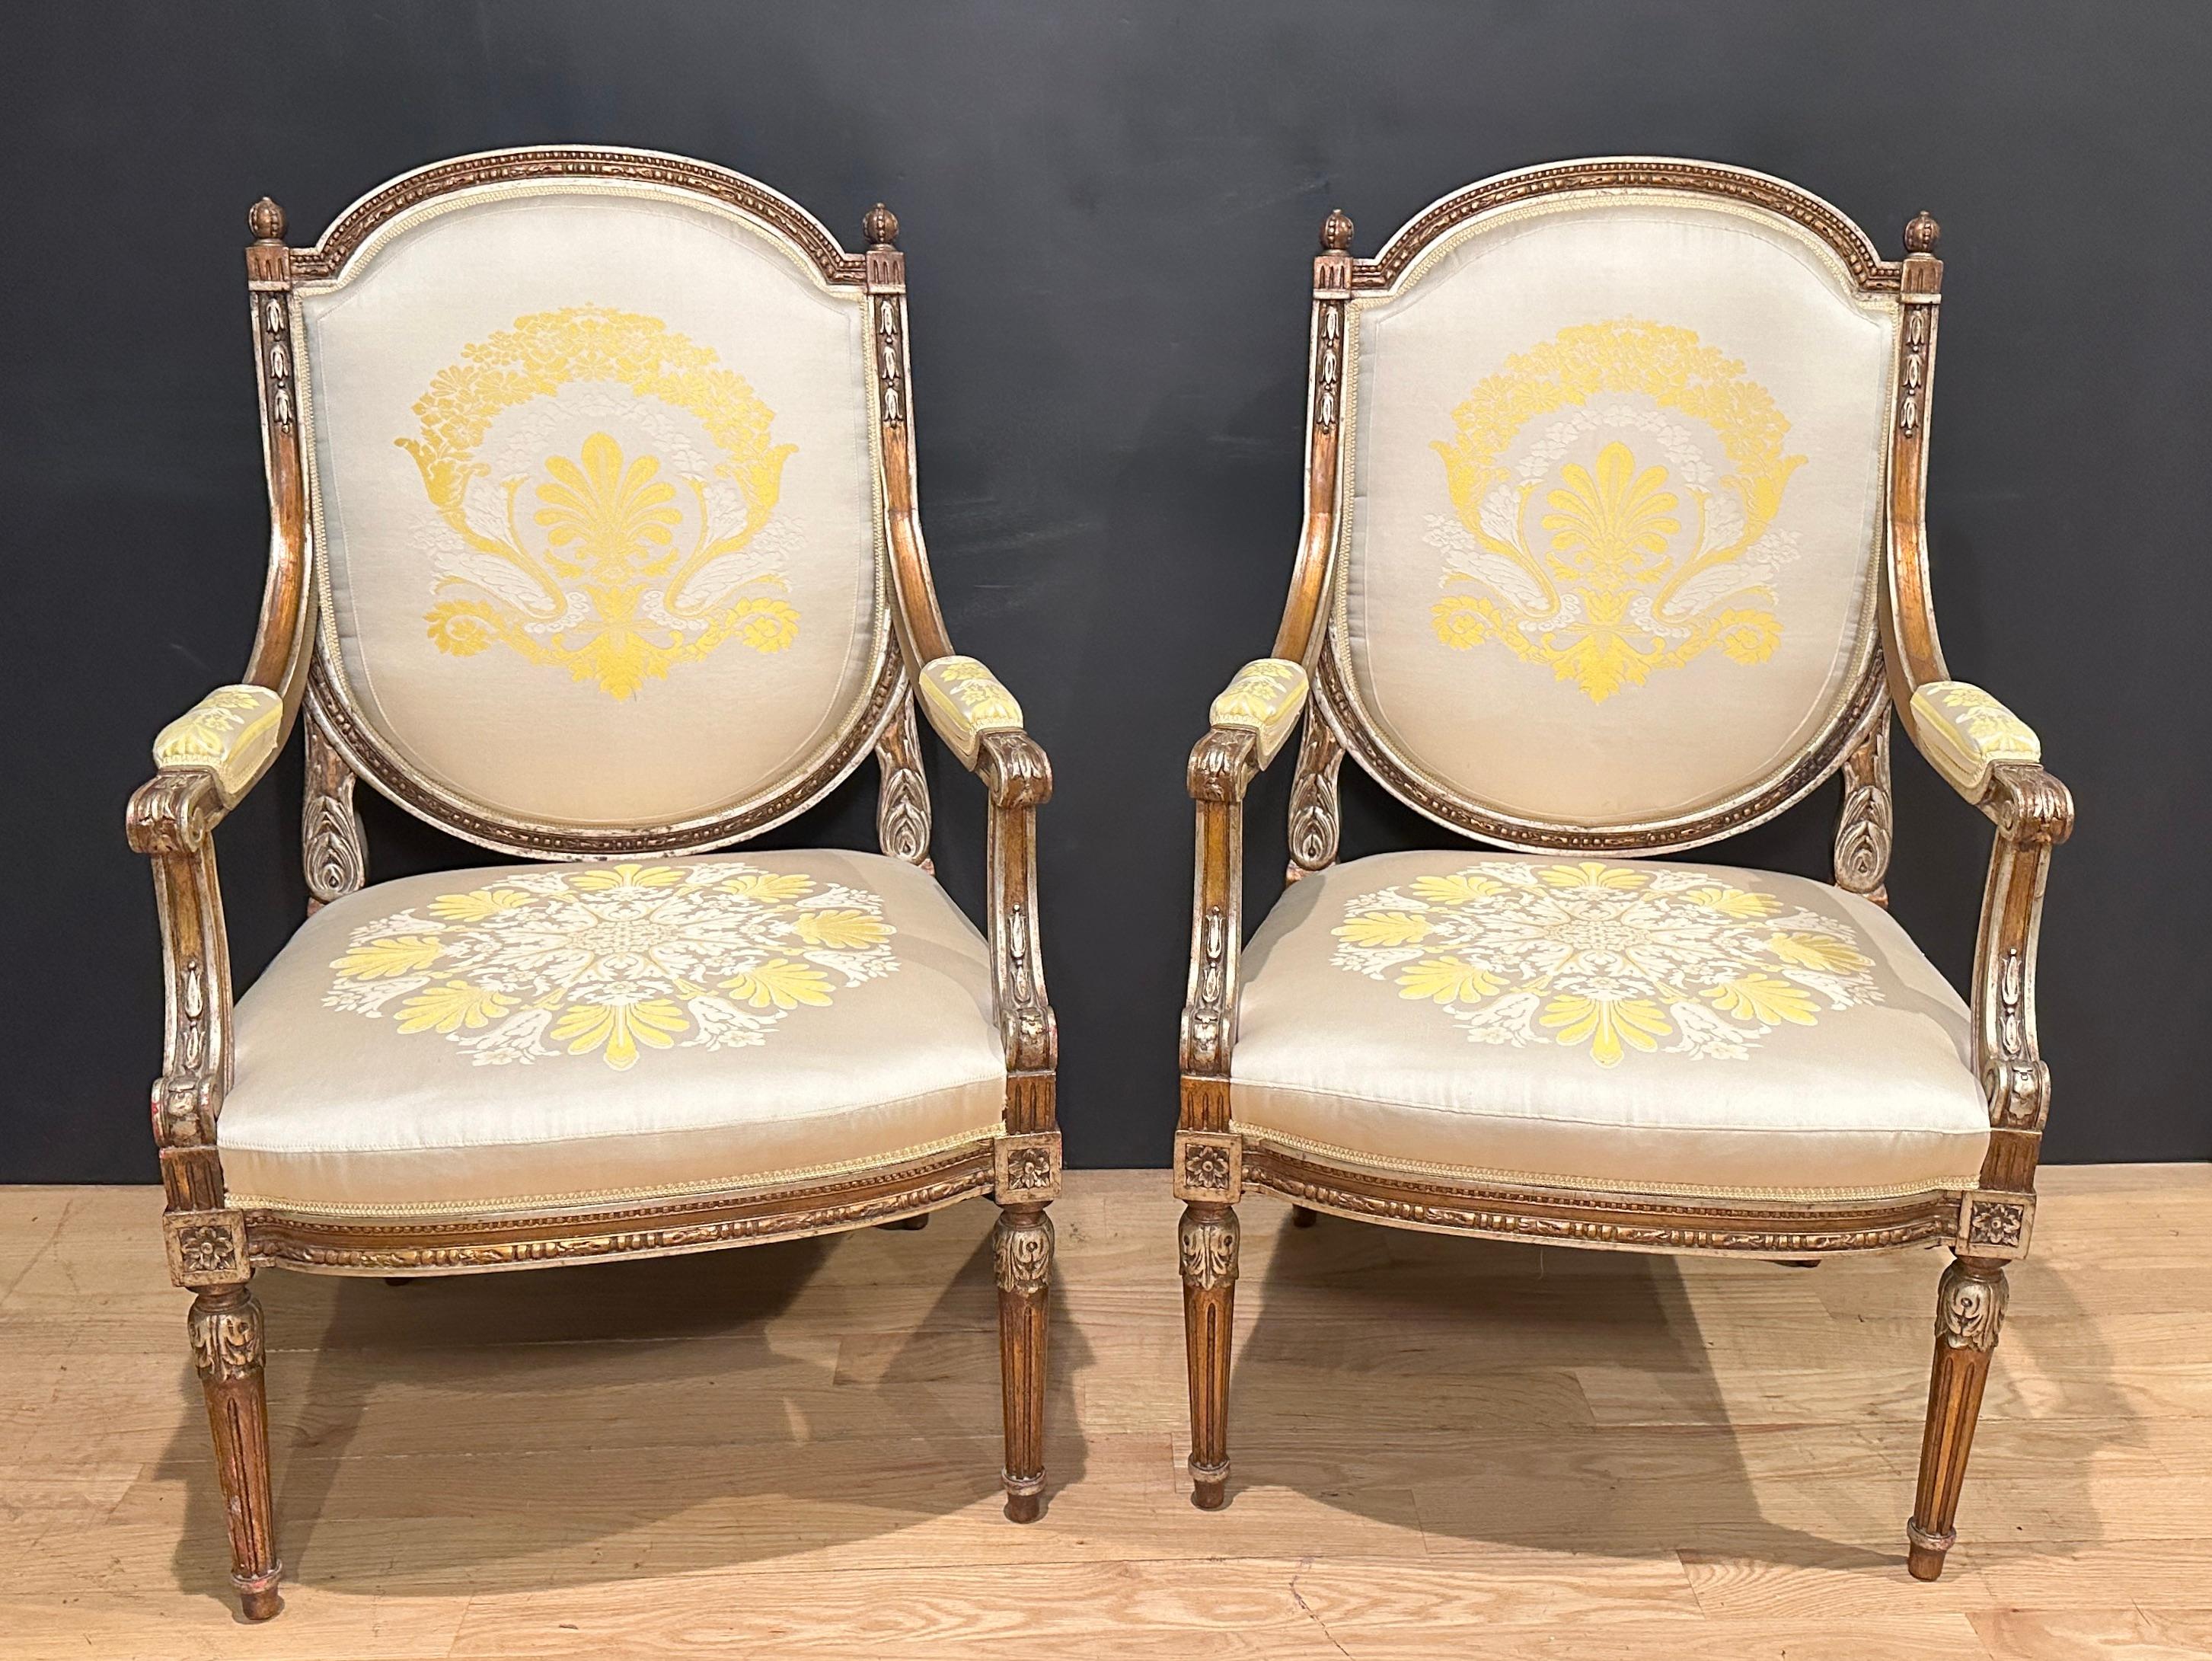 Fine pair of antique French Louis XVI style armchairs/fauteuils. Silver gilt details with a bronze tone gold ground. Upholstered in a champagne silk brocade with gold and ivory highlights.